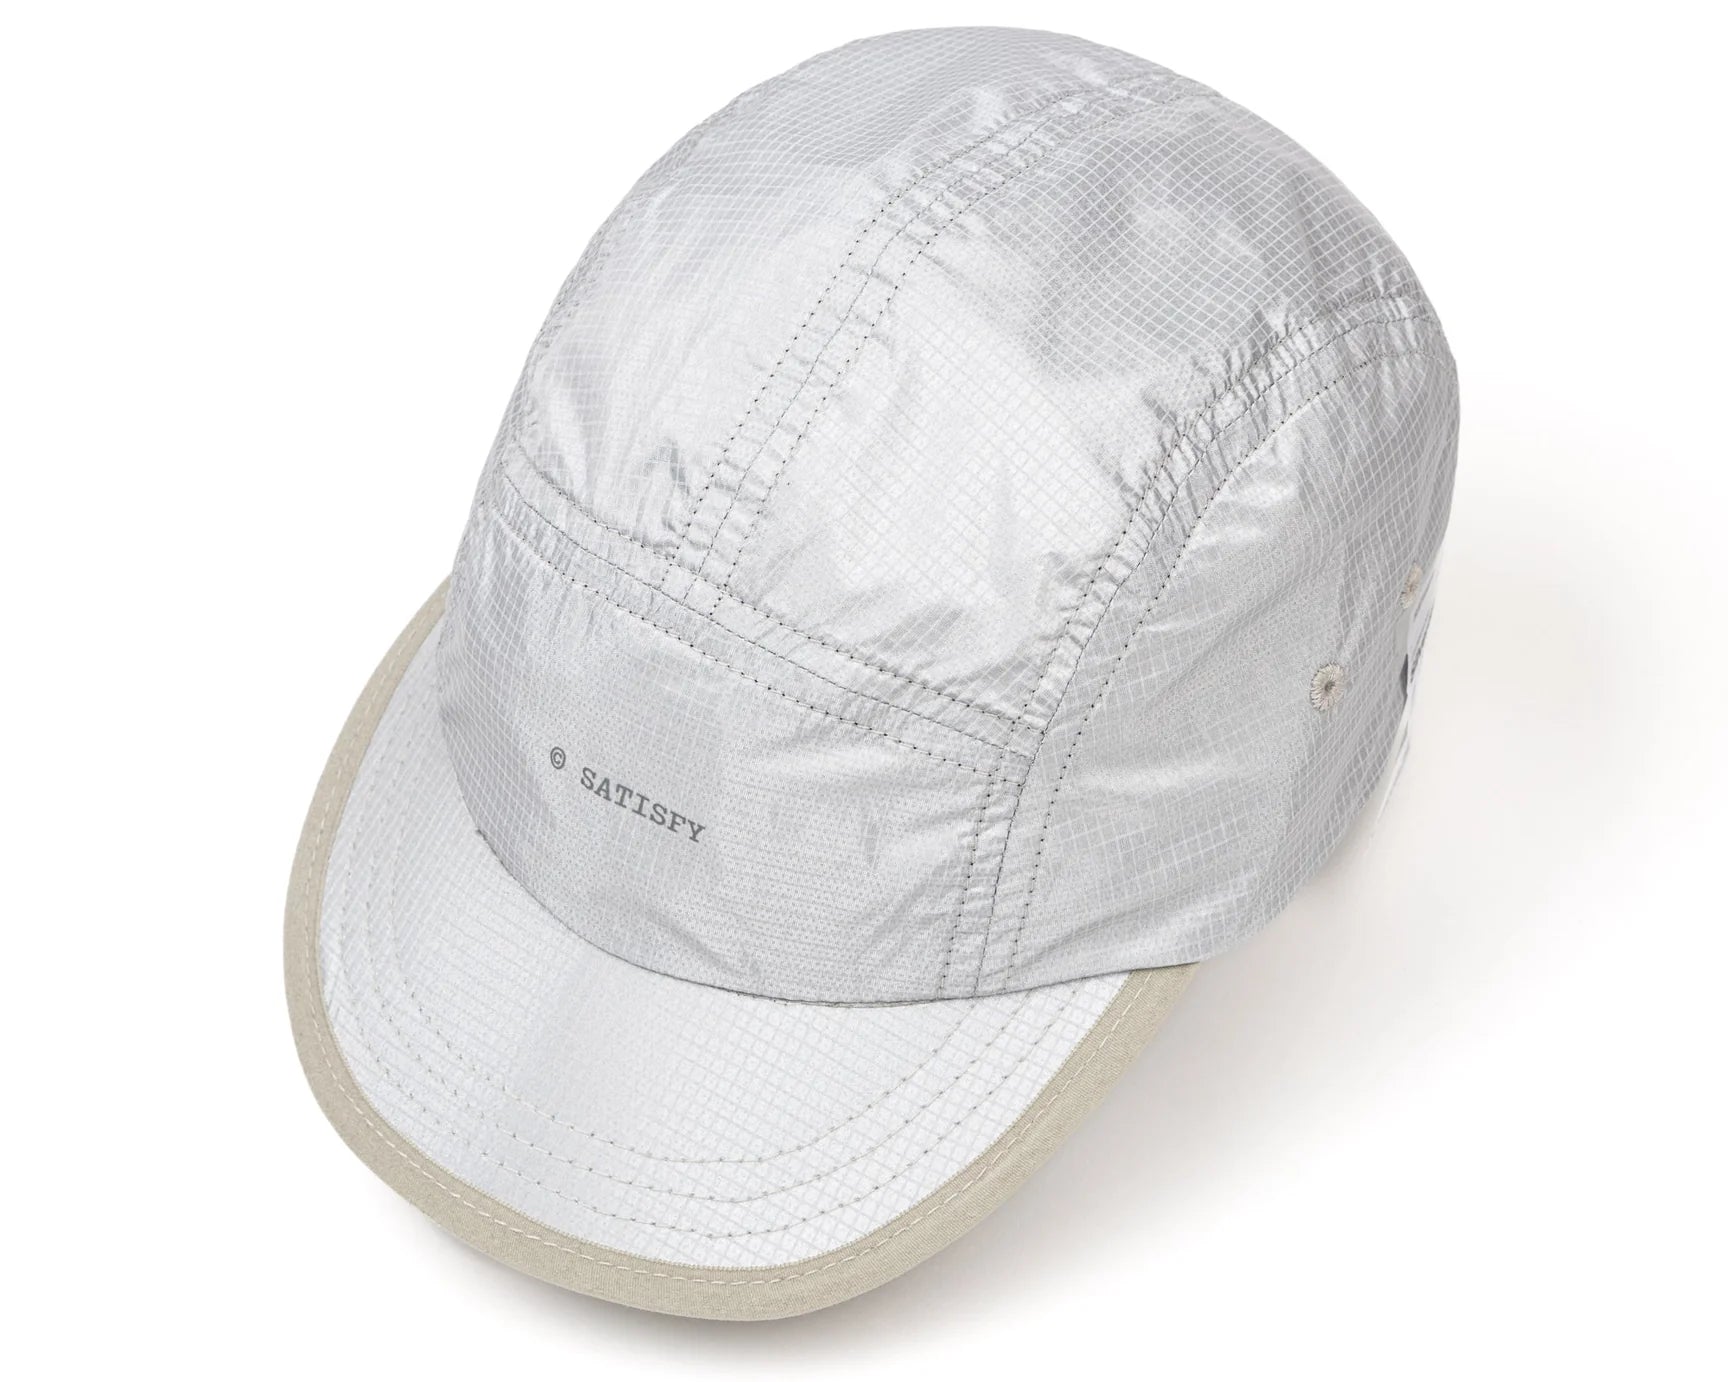 SATISFY - SilverShell™ Trail Cap - Space Camp